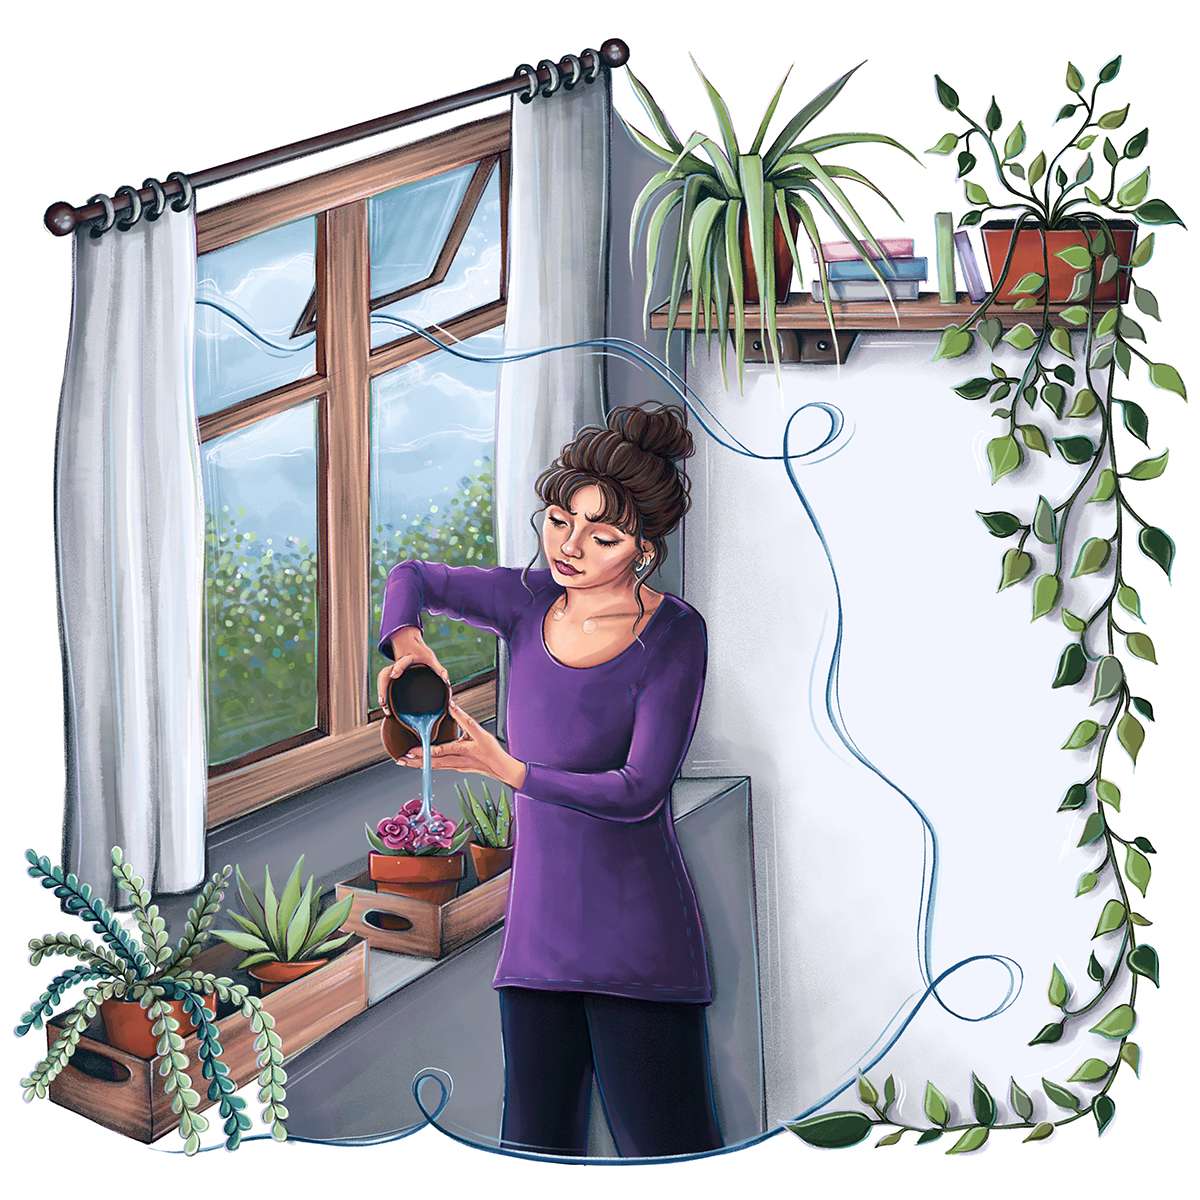 An illustration showing a woman watering some flowers in the corner of a room, plants surrounding her, and an open window letting in fresh air.